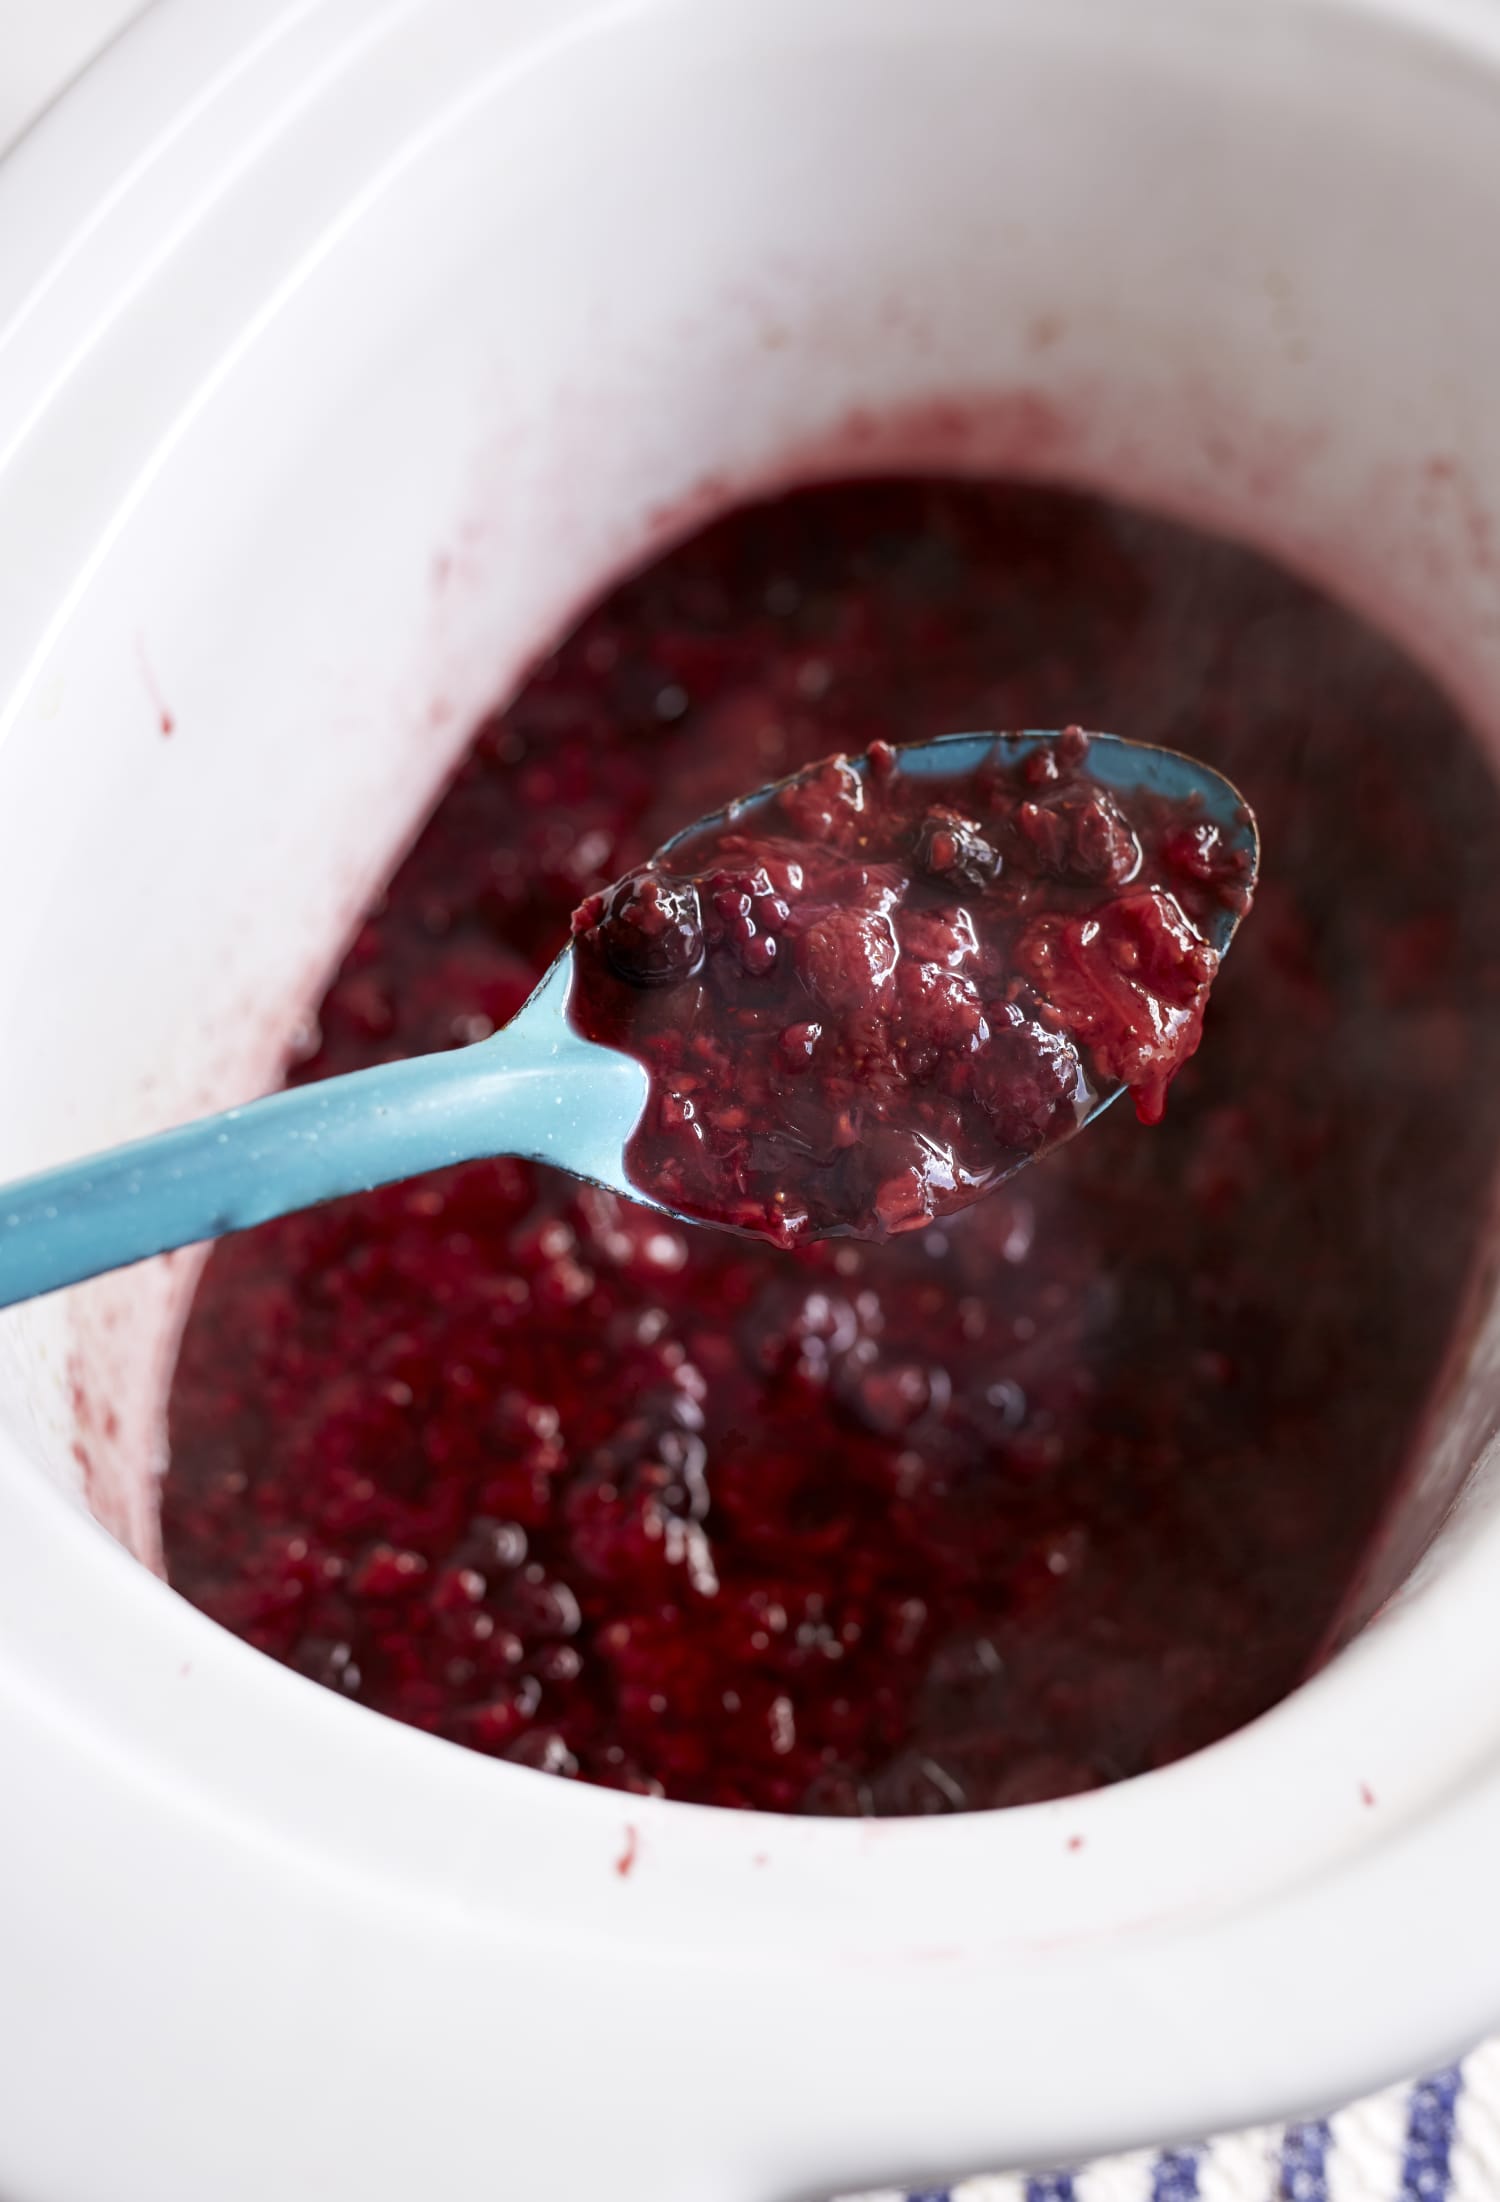 How To Make Summer Fruit Sauce in the Slow Cooker | Kitchn